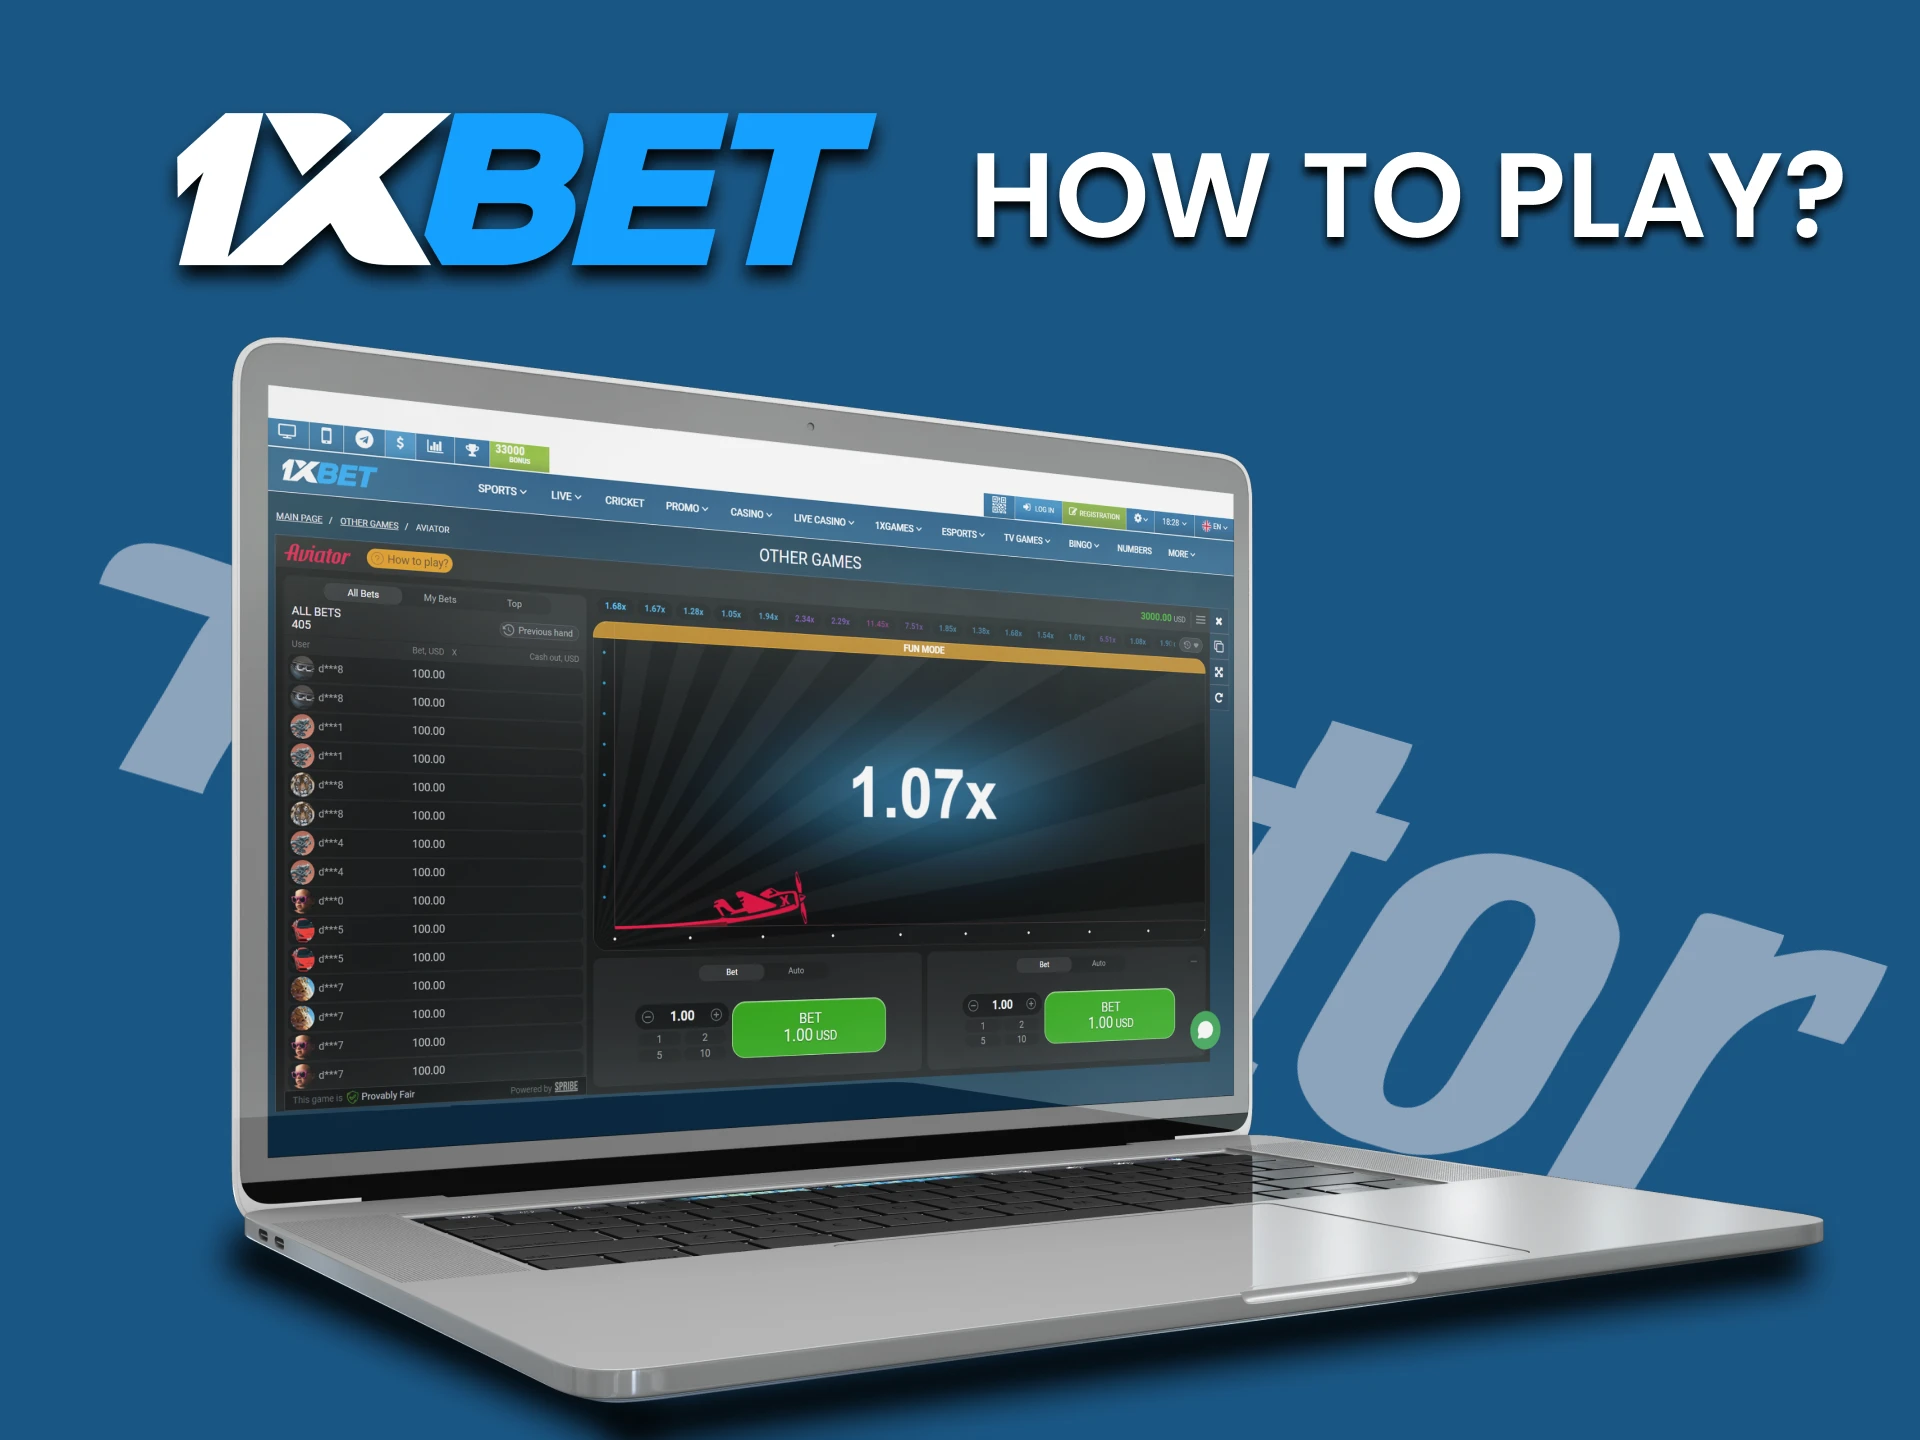 We will show you how to start playing the demo version of Aviator on 1xbet.